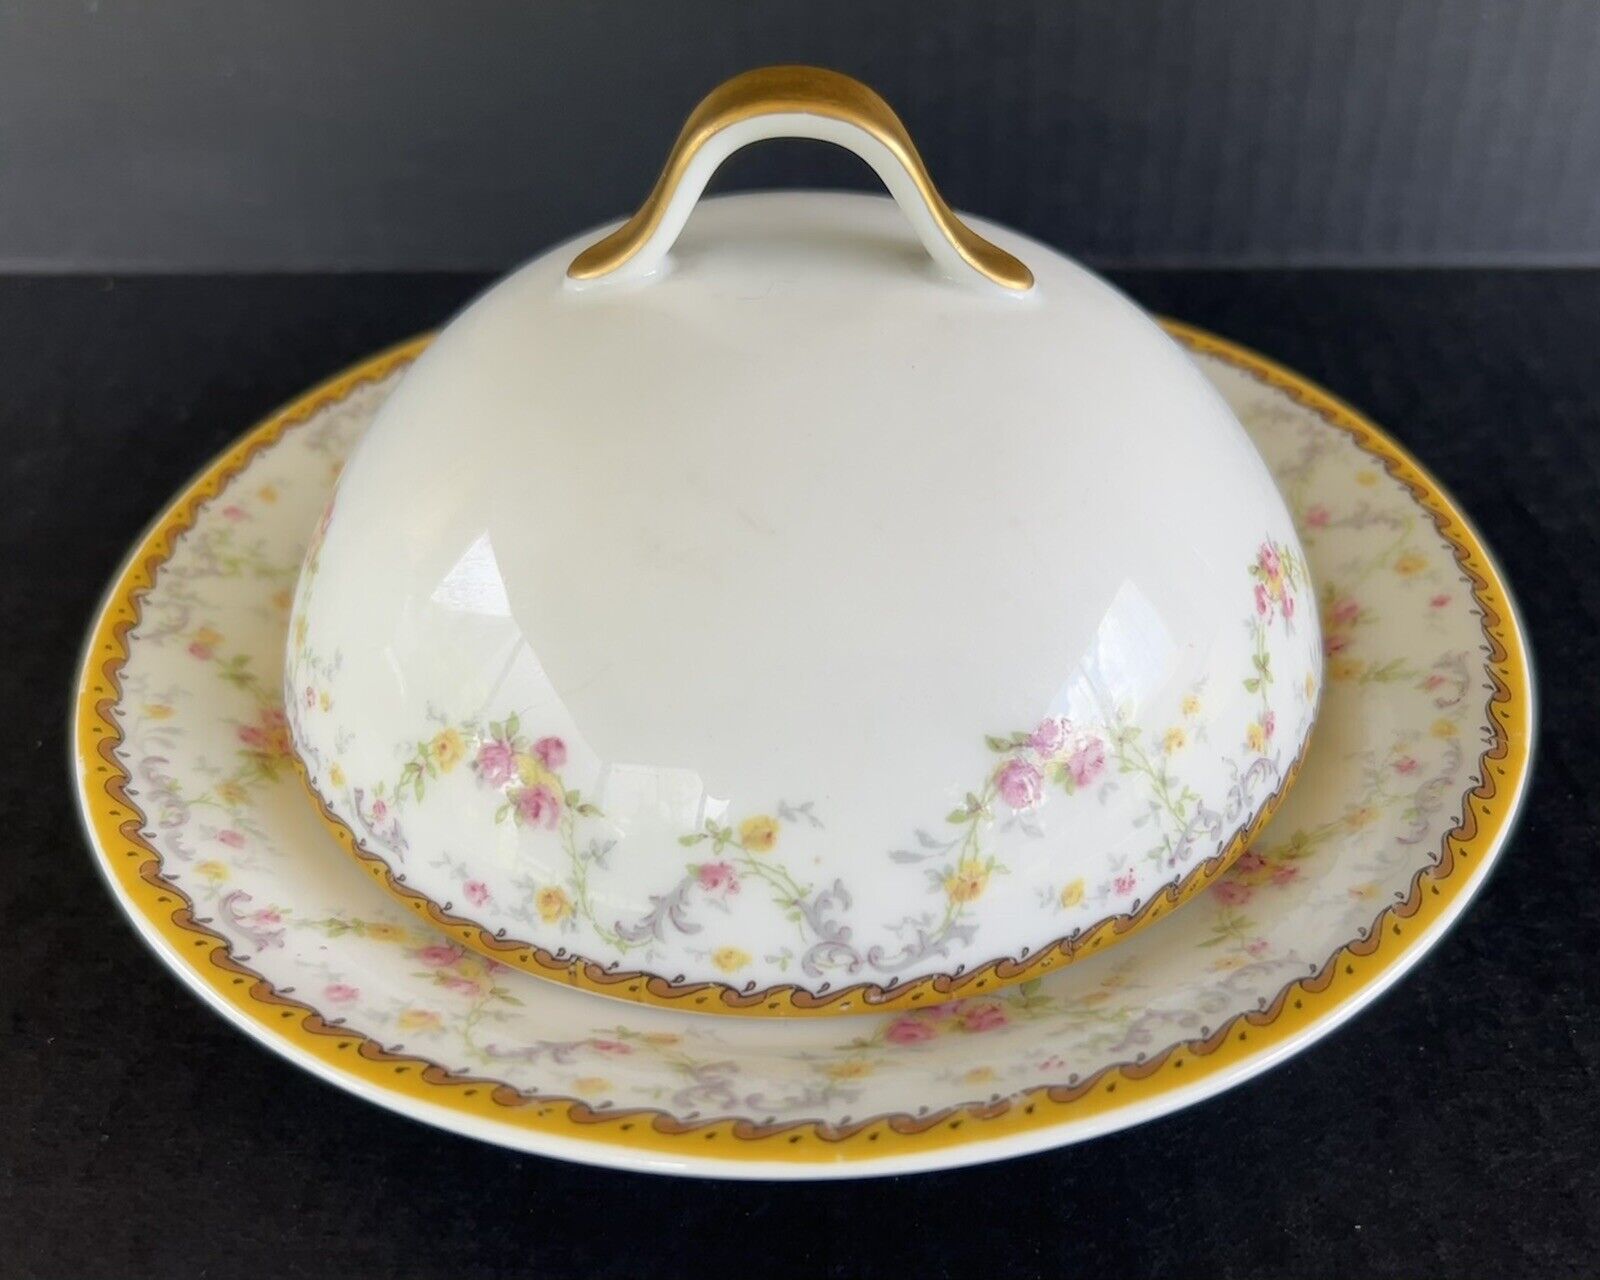 Theodore Haviland Limoges Spa Butter Dish Round 3 Piece France Circa 1903